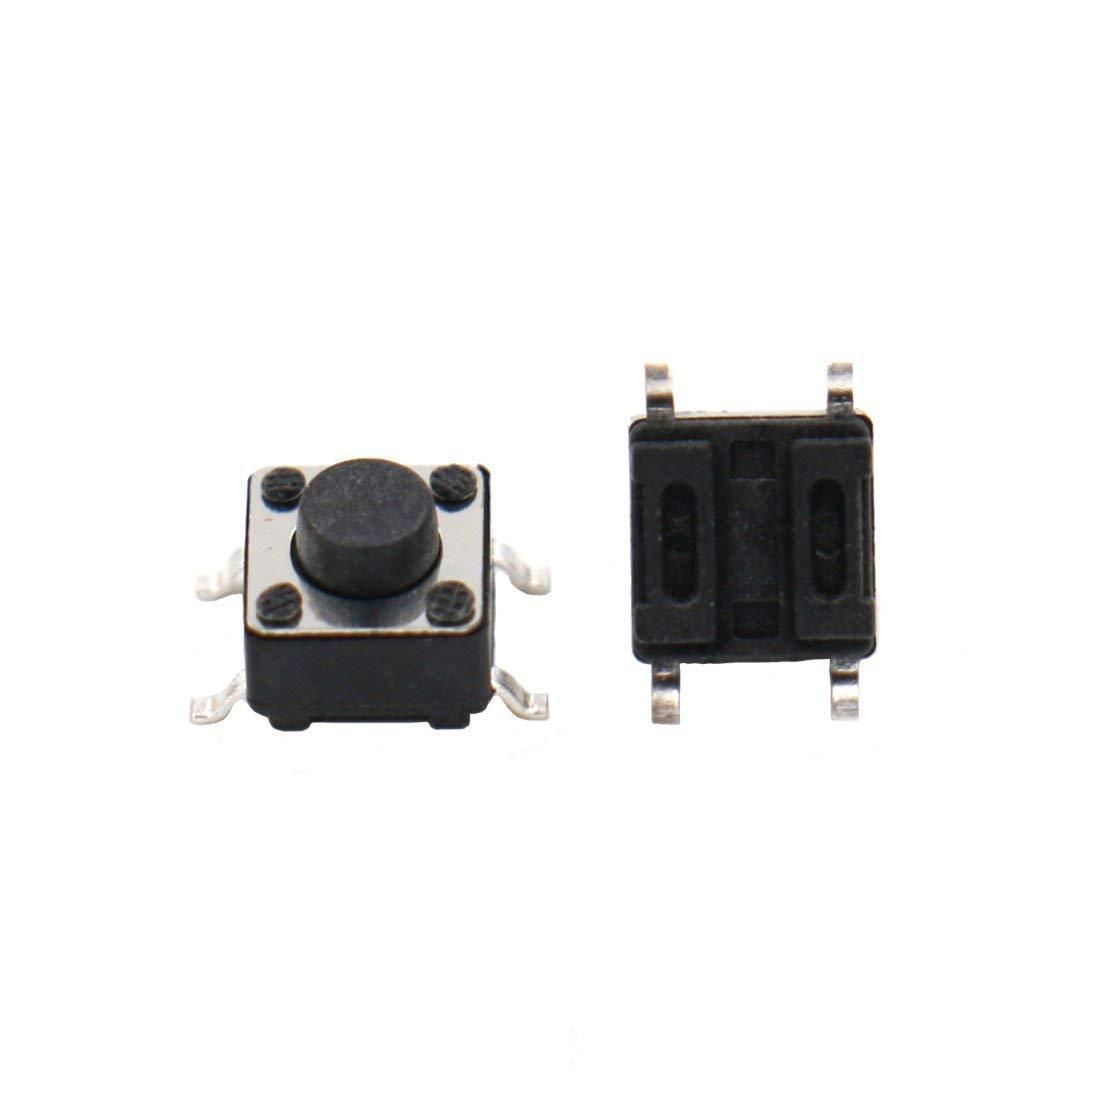 6x6x6mm Tactile Micro Switch SMD [25pcs Pack]